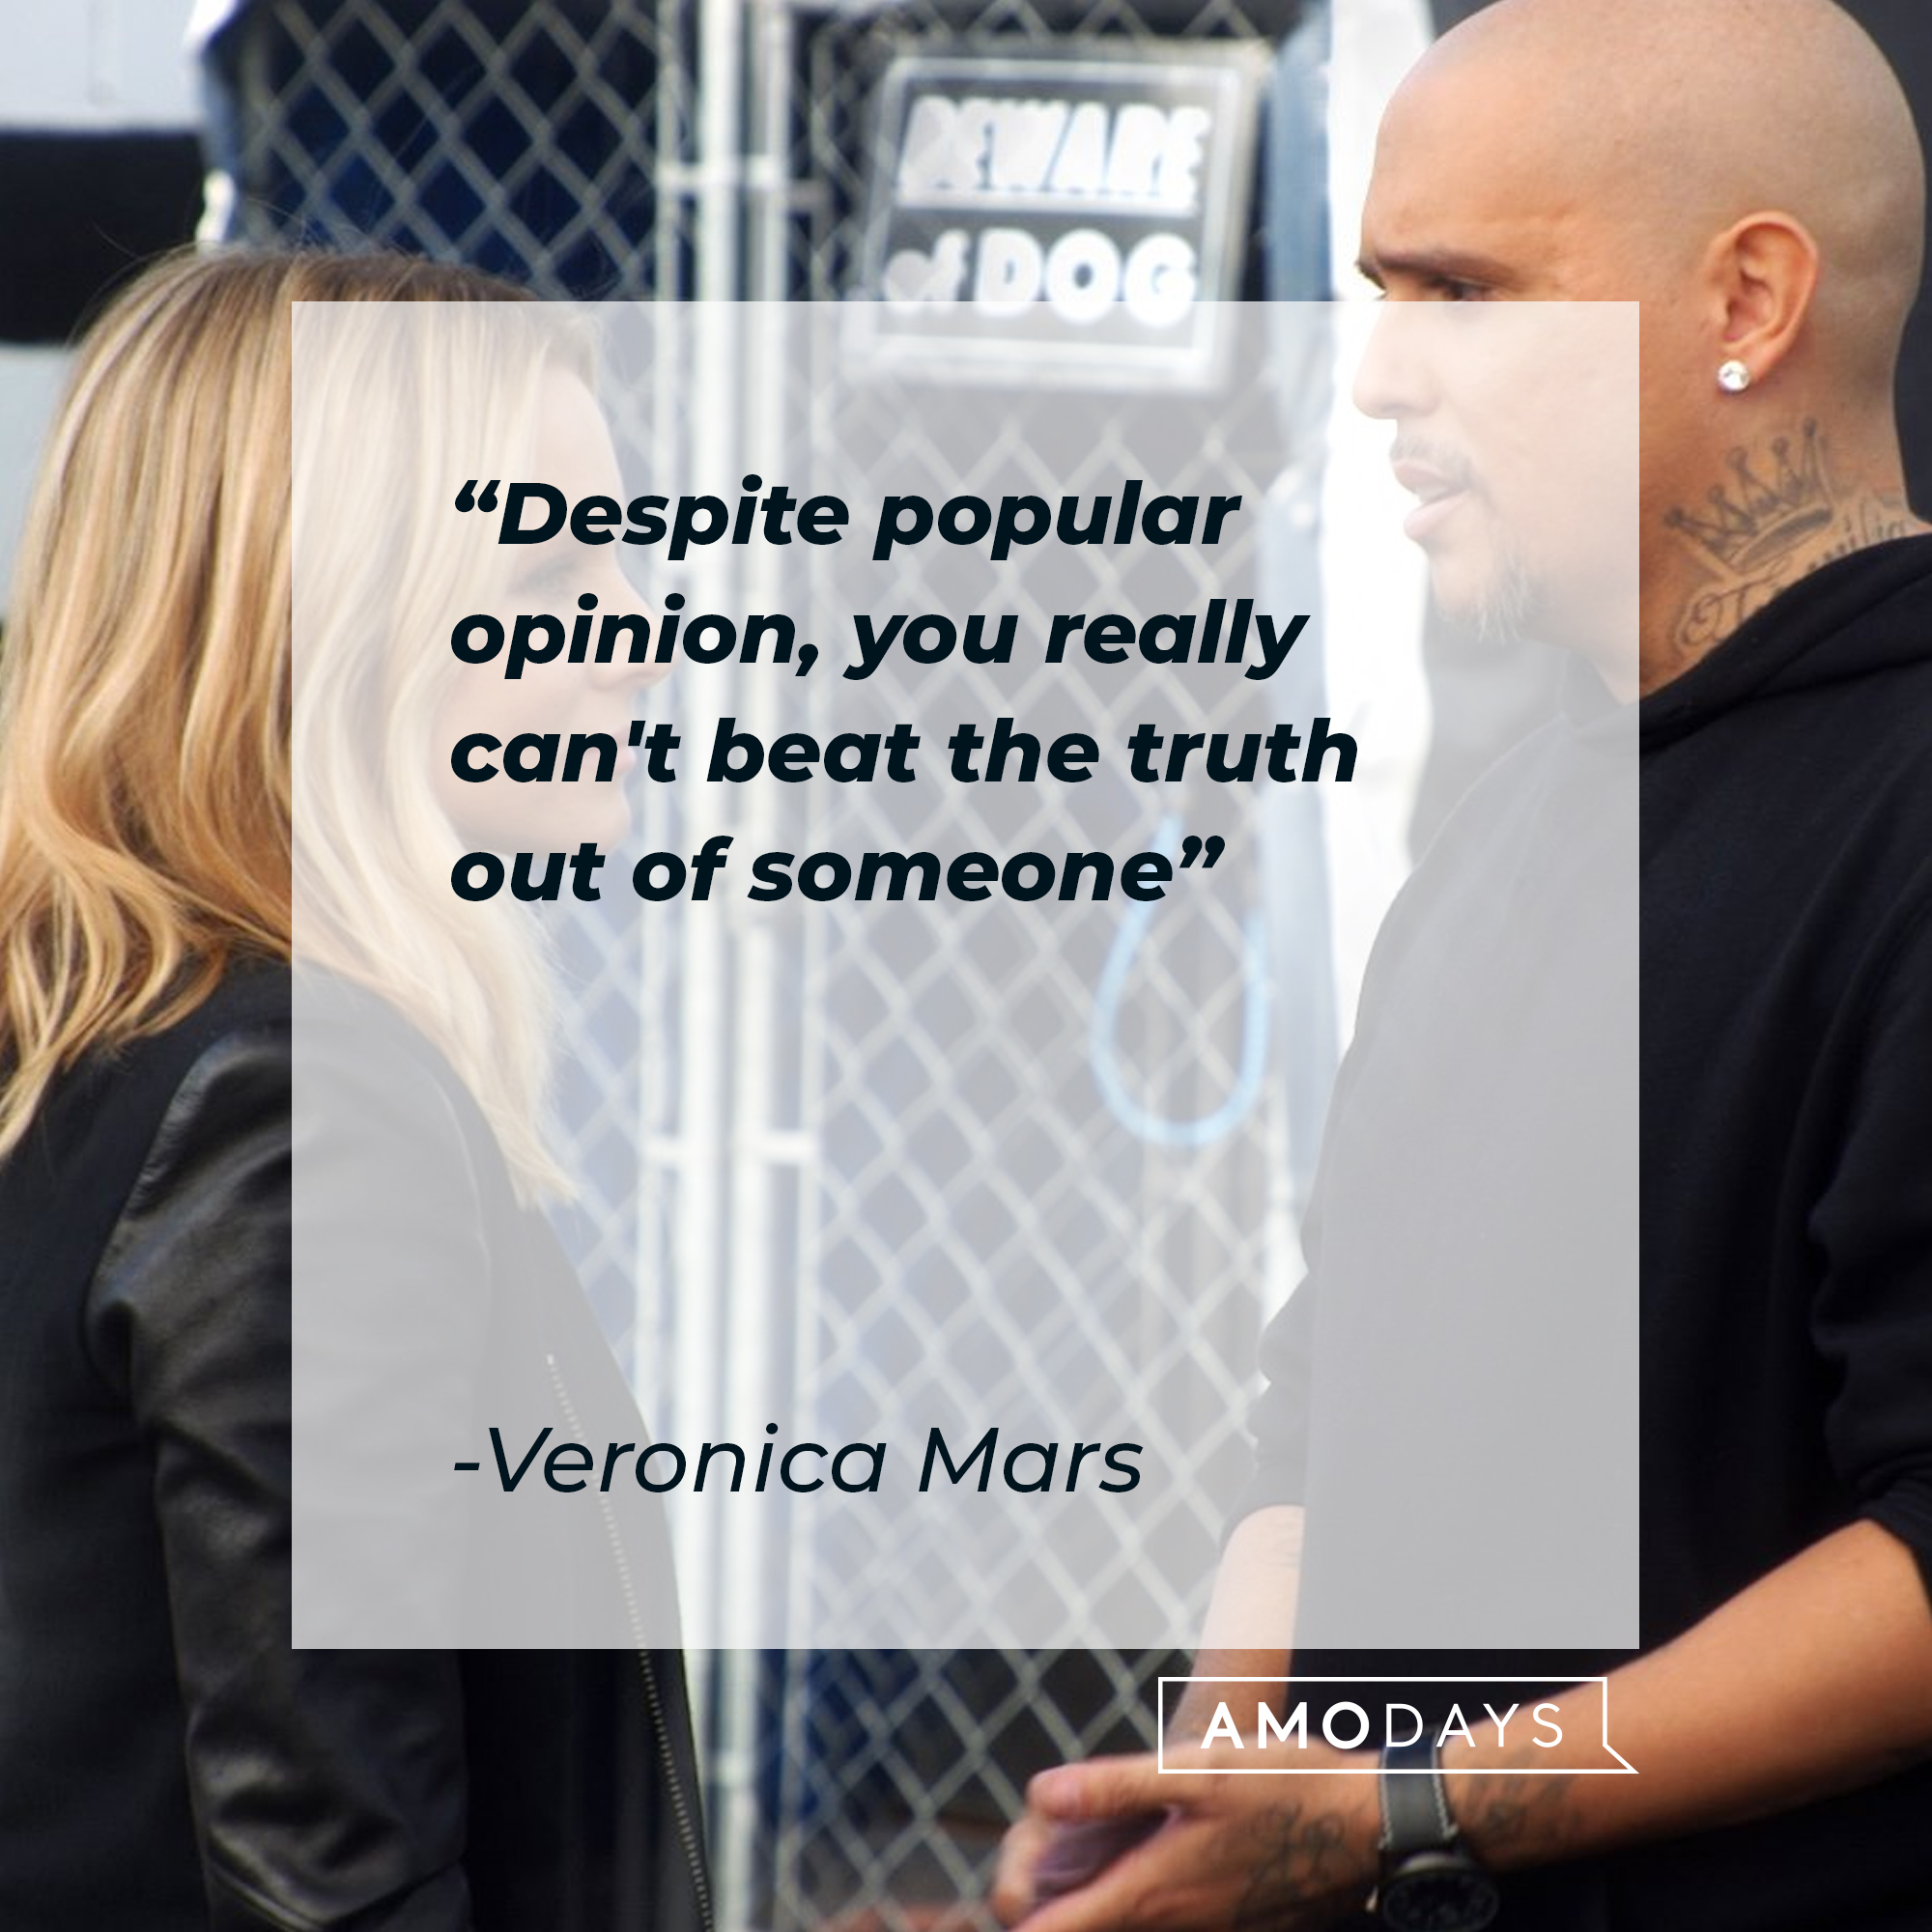 Veronica Mars' quote: "Despite popular opinion, you really can't beat the truth out of someone" | Source: facebook.com/VeronicaMars